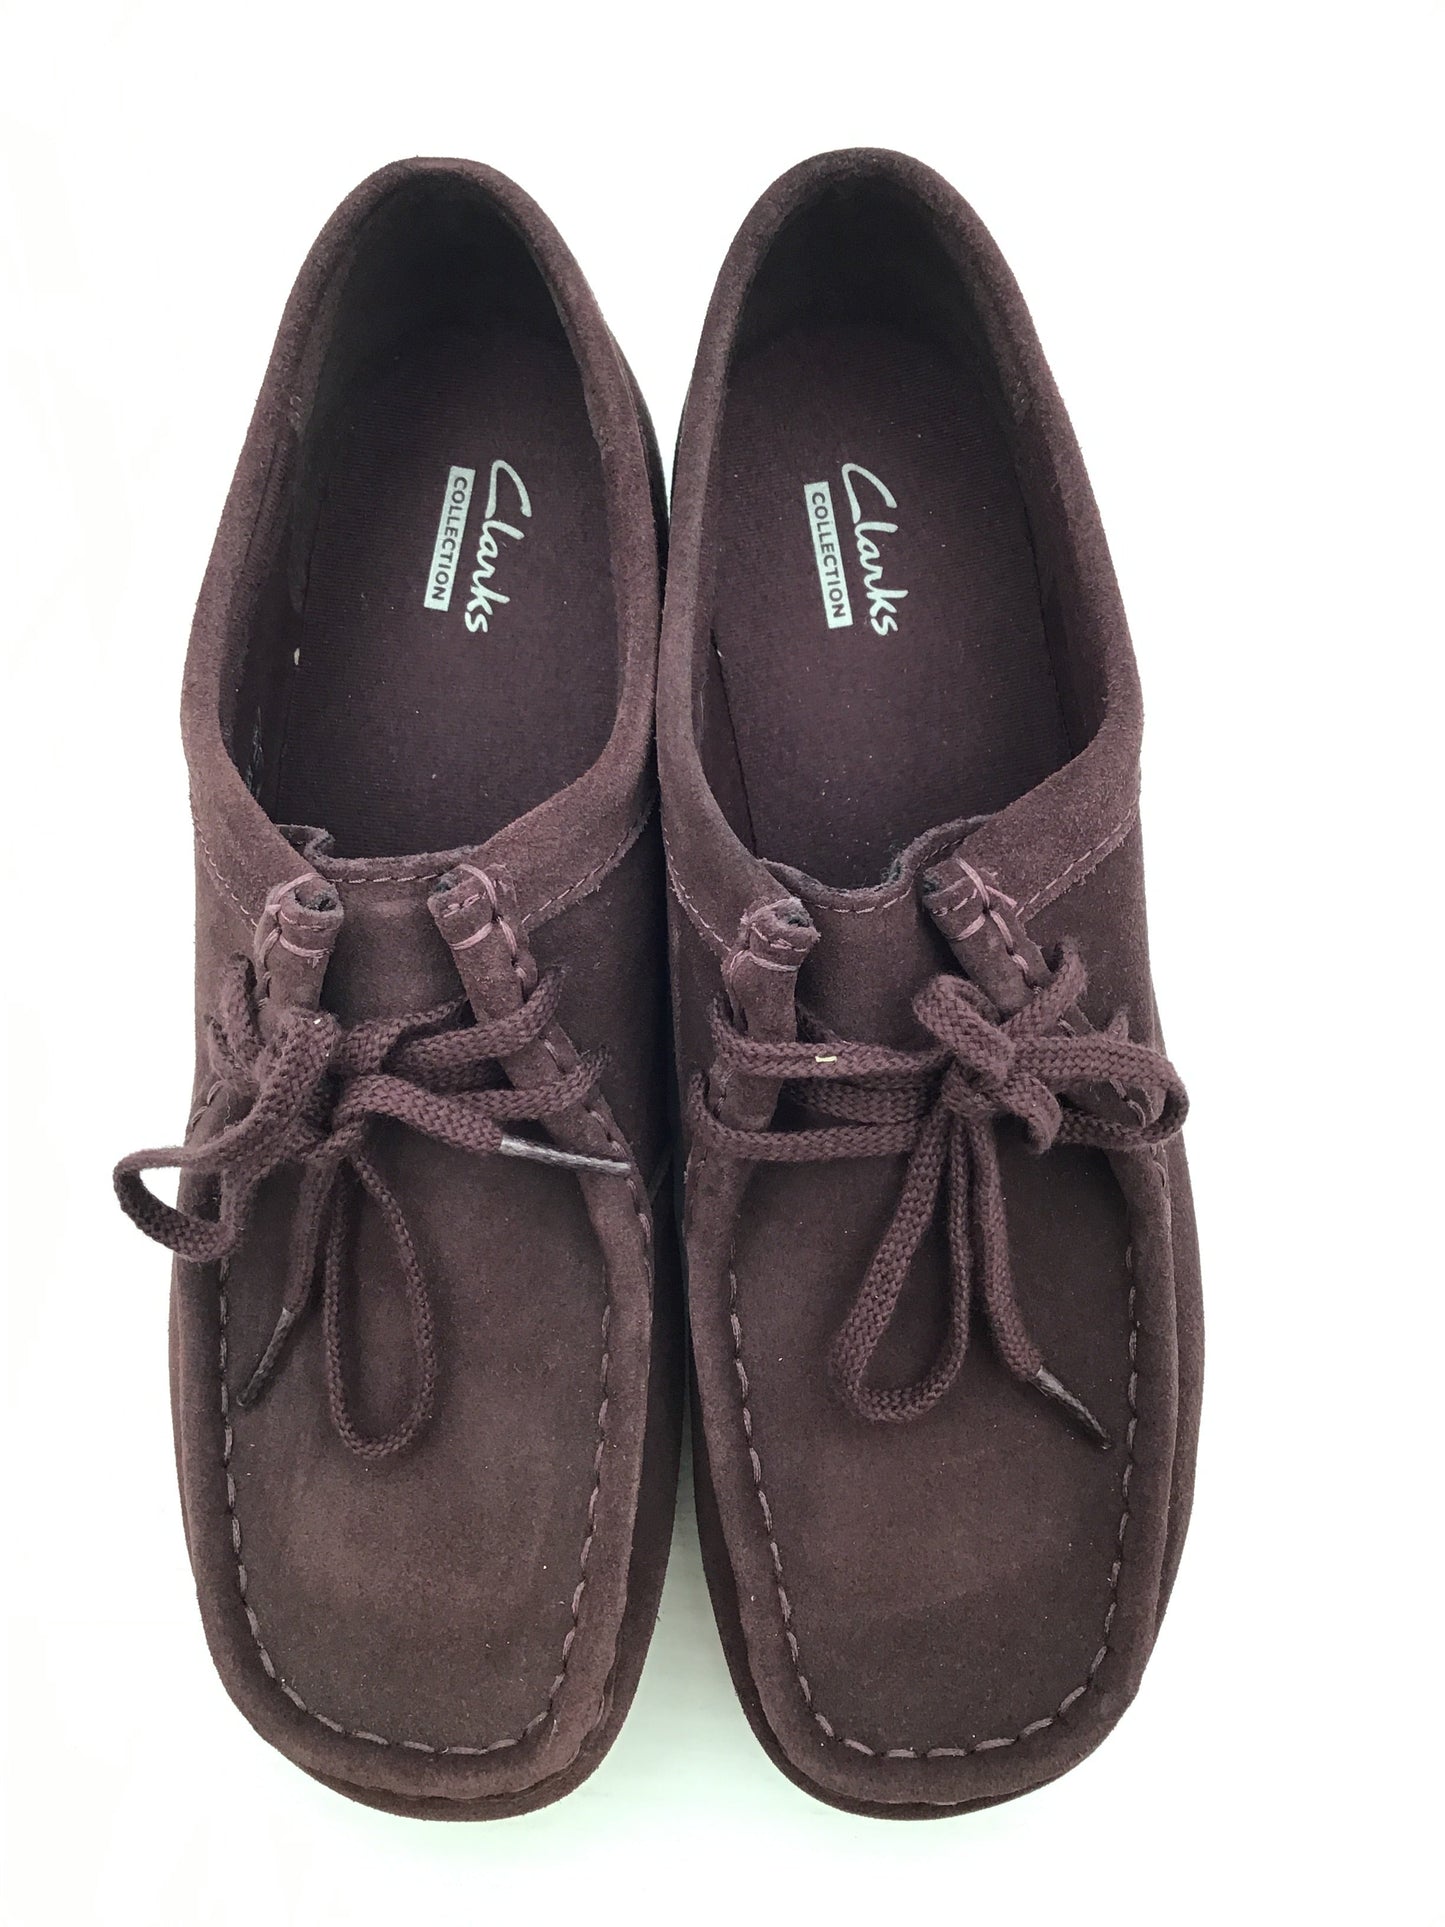 Shoes Flats Moccasin By Clarks  Size: 8.5